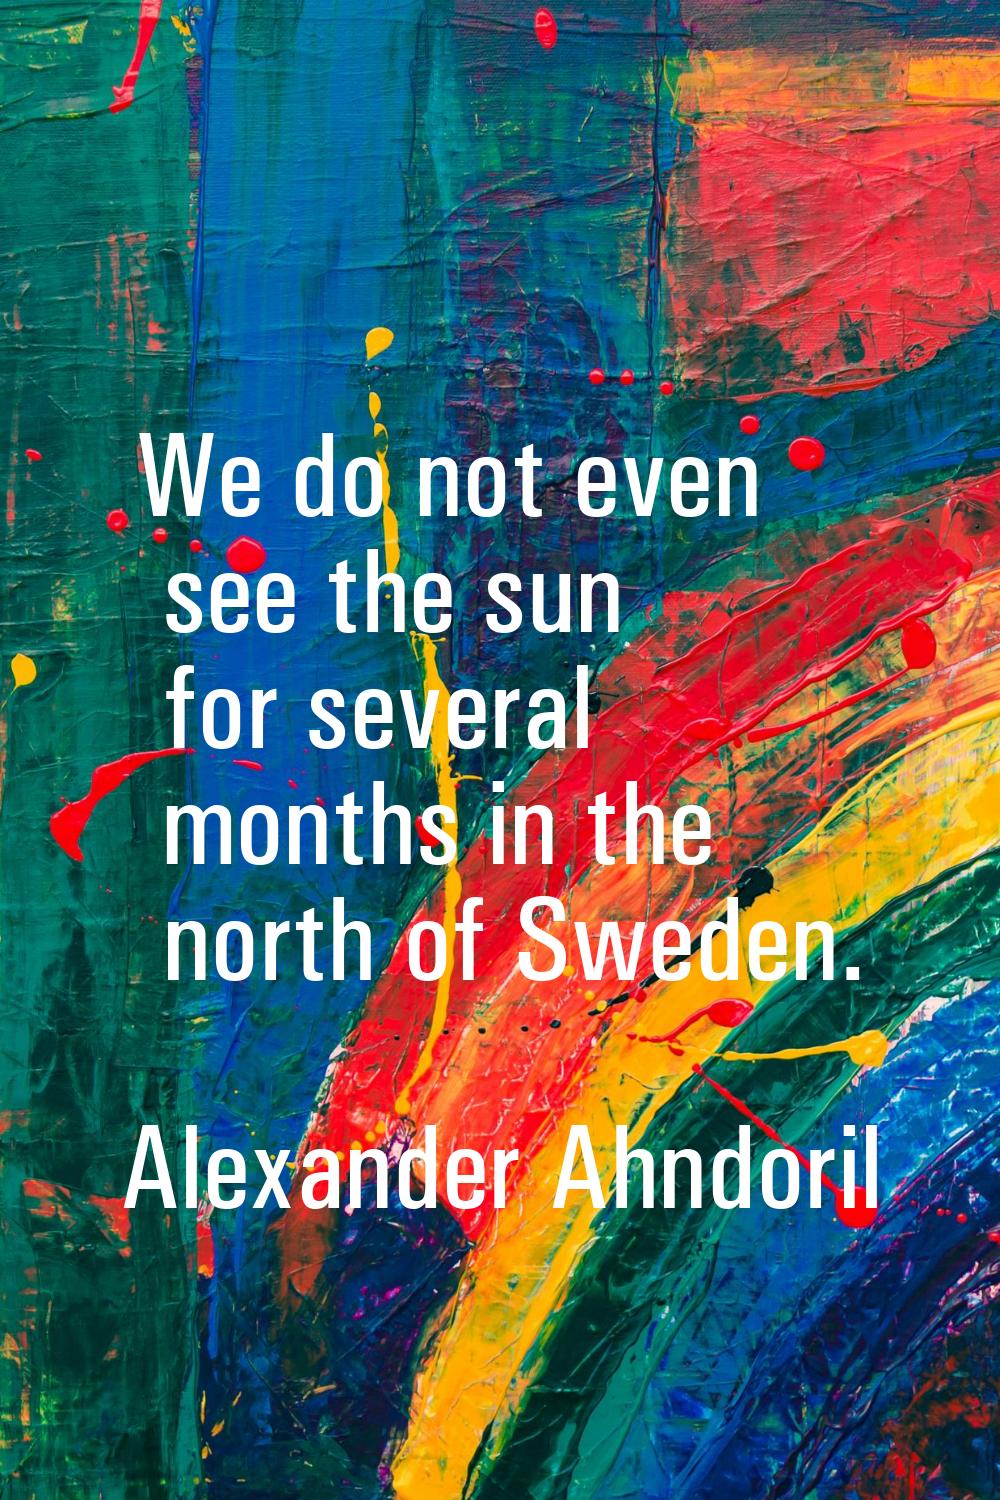 We do not even see the sun for several months in the north of Sweden.